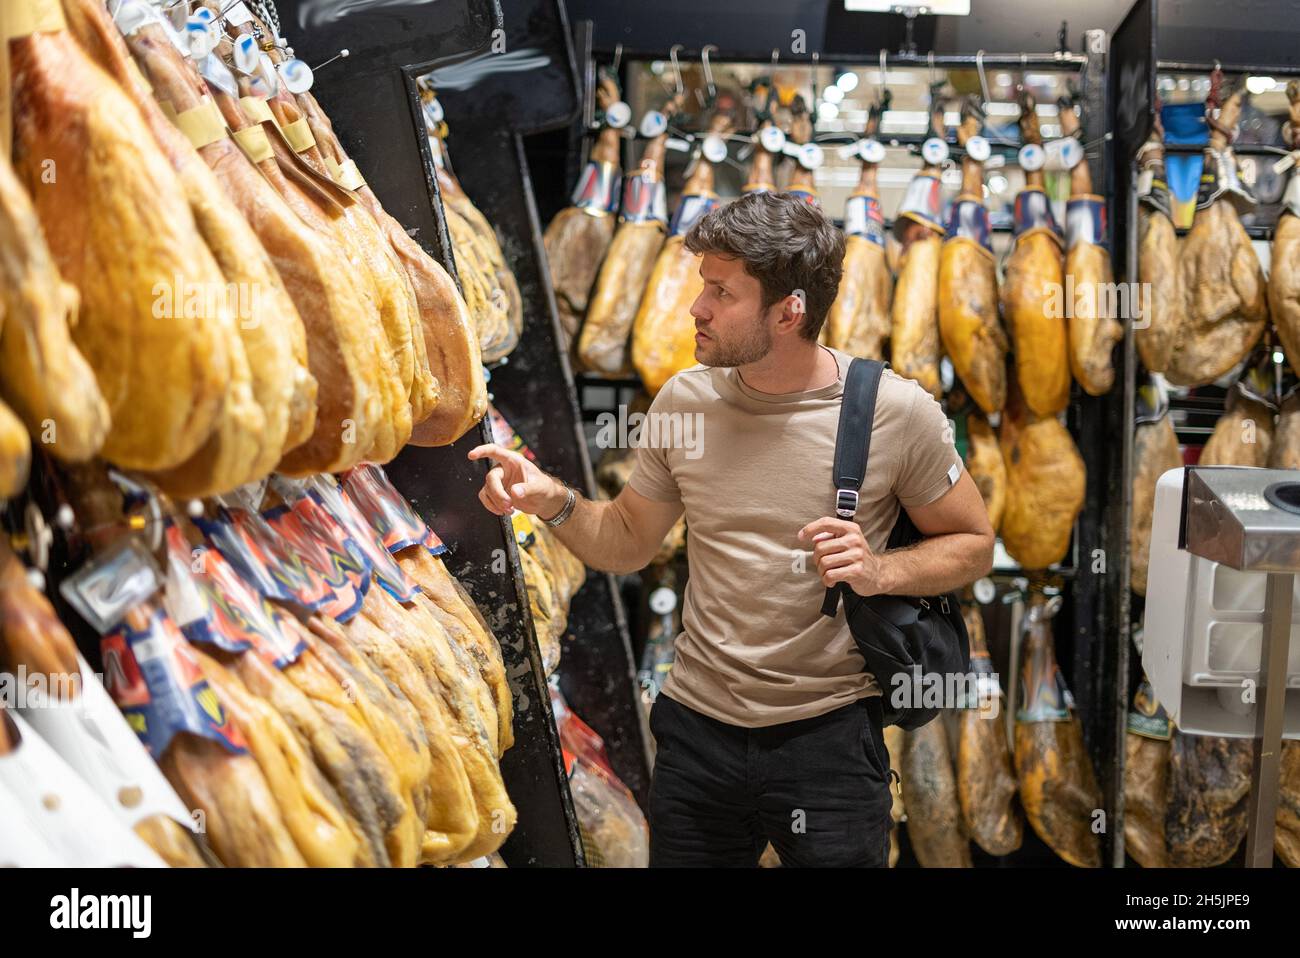 Male client with bag examining and selecting Spanish jamon hanging on racks while shopping in supermarket Stock Photo